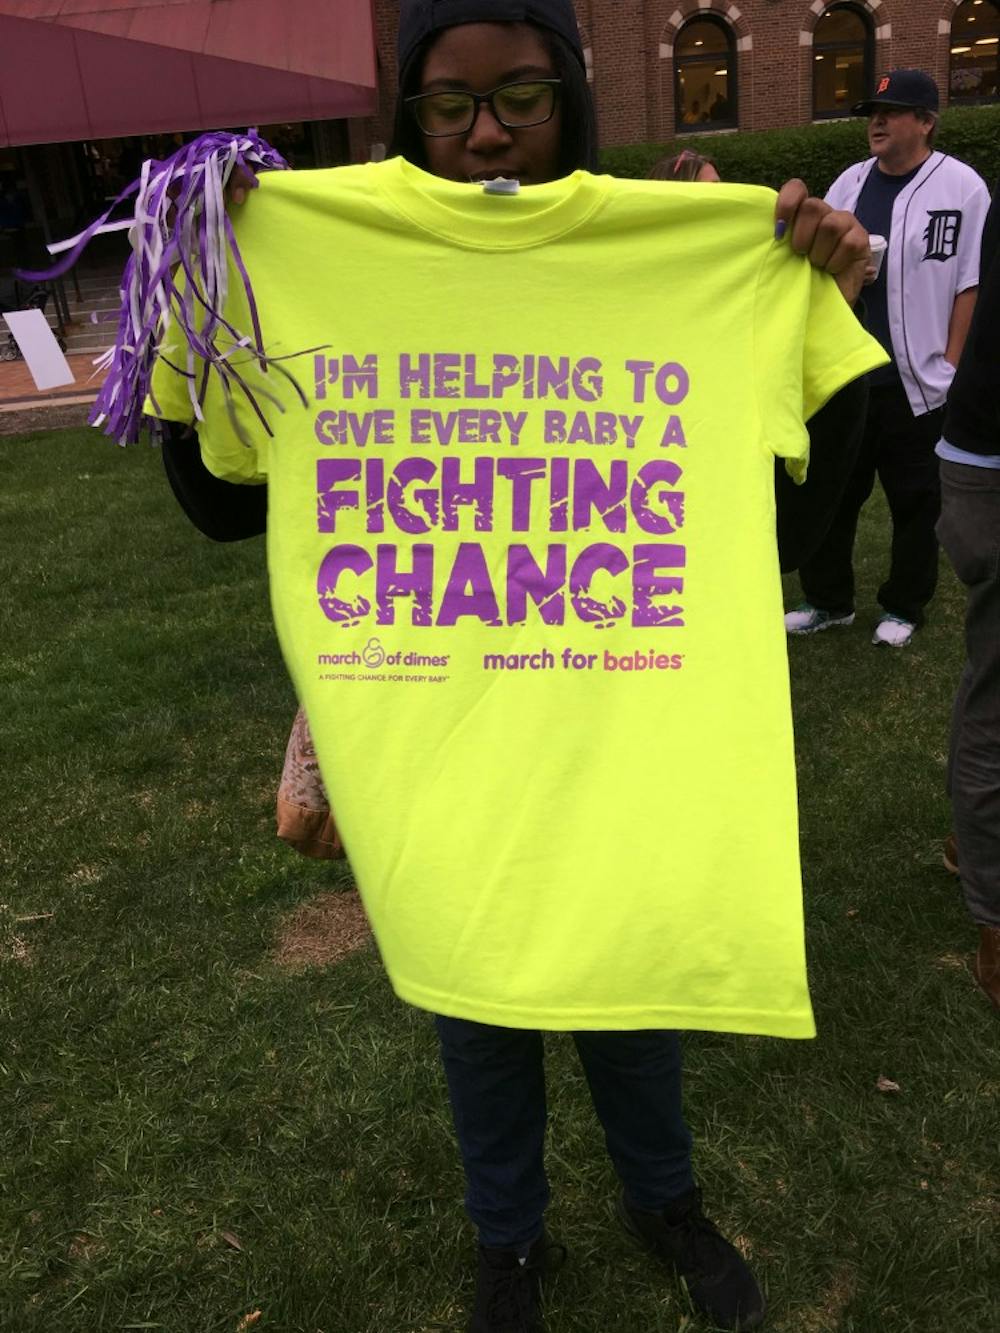 <p>The Key Club has participated in many community service projects since its founding. The most recent was a project with The March of Dimes.</p>